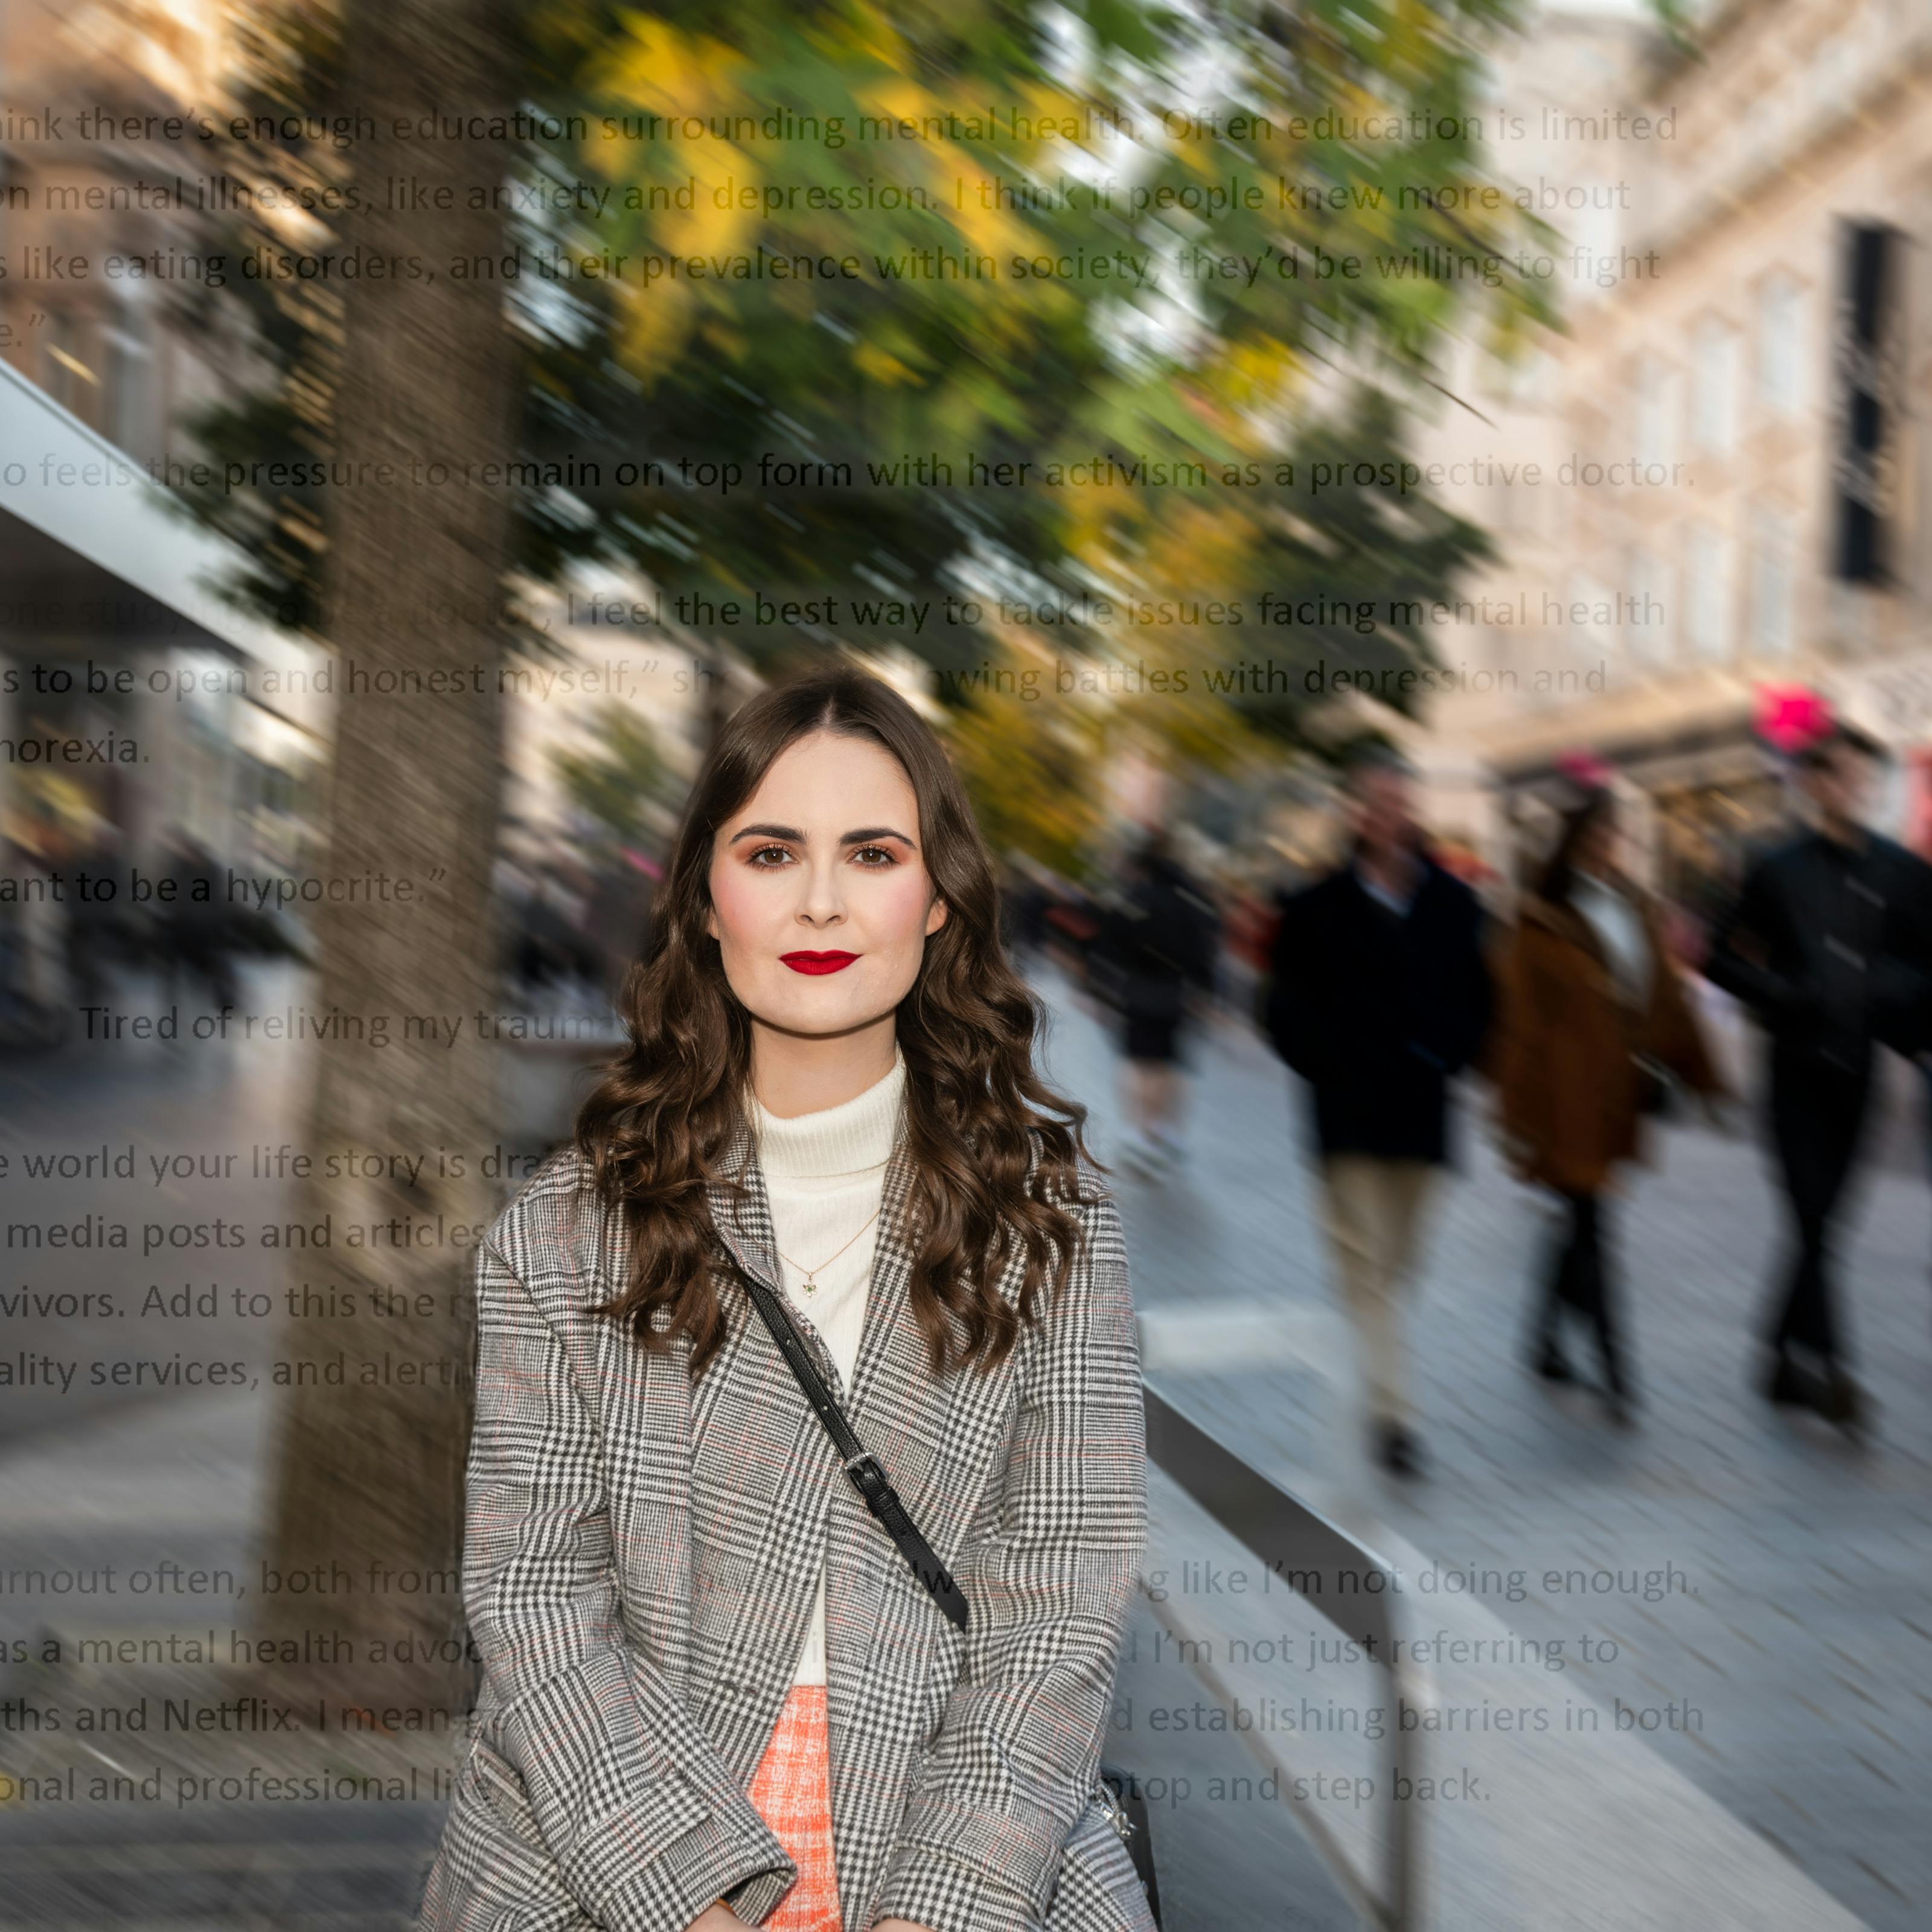 Portrait of Emily Bashforth. She is standing on a busy street which is blurred in the background. She is wearing a cream jumper, a checked coat, orange plaid skirt and red lipstick. She has long wavy brown hair and is looking directly at the camera. 

Superimposed on the image are lines of text - mostly unreadable. A visible phrase reads 'Tired of reliving my trauma'. 